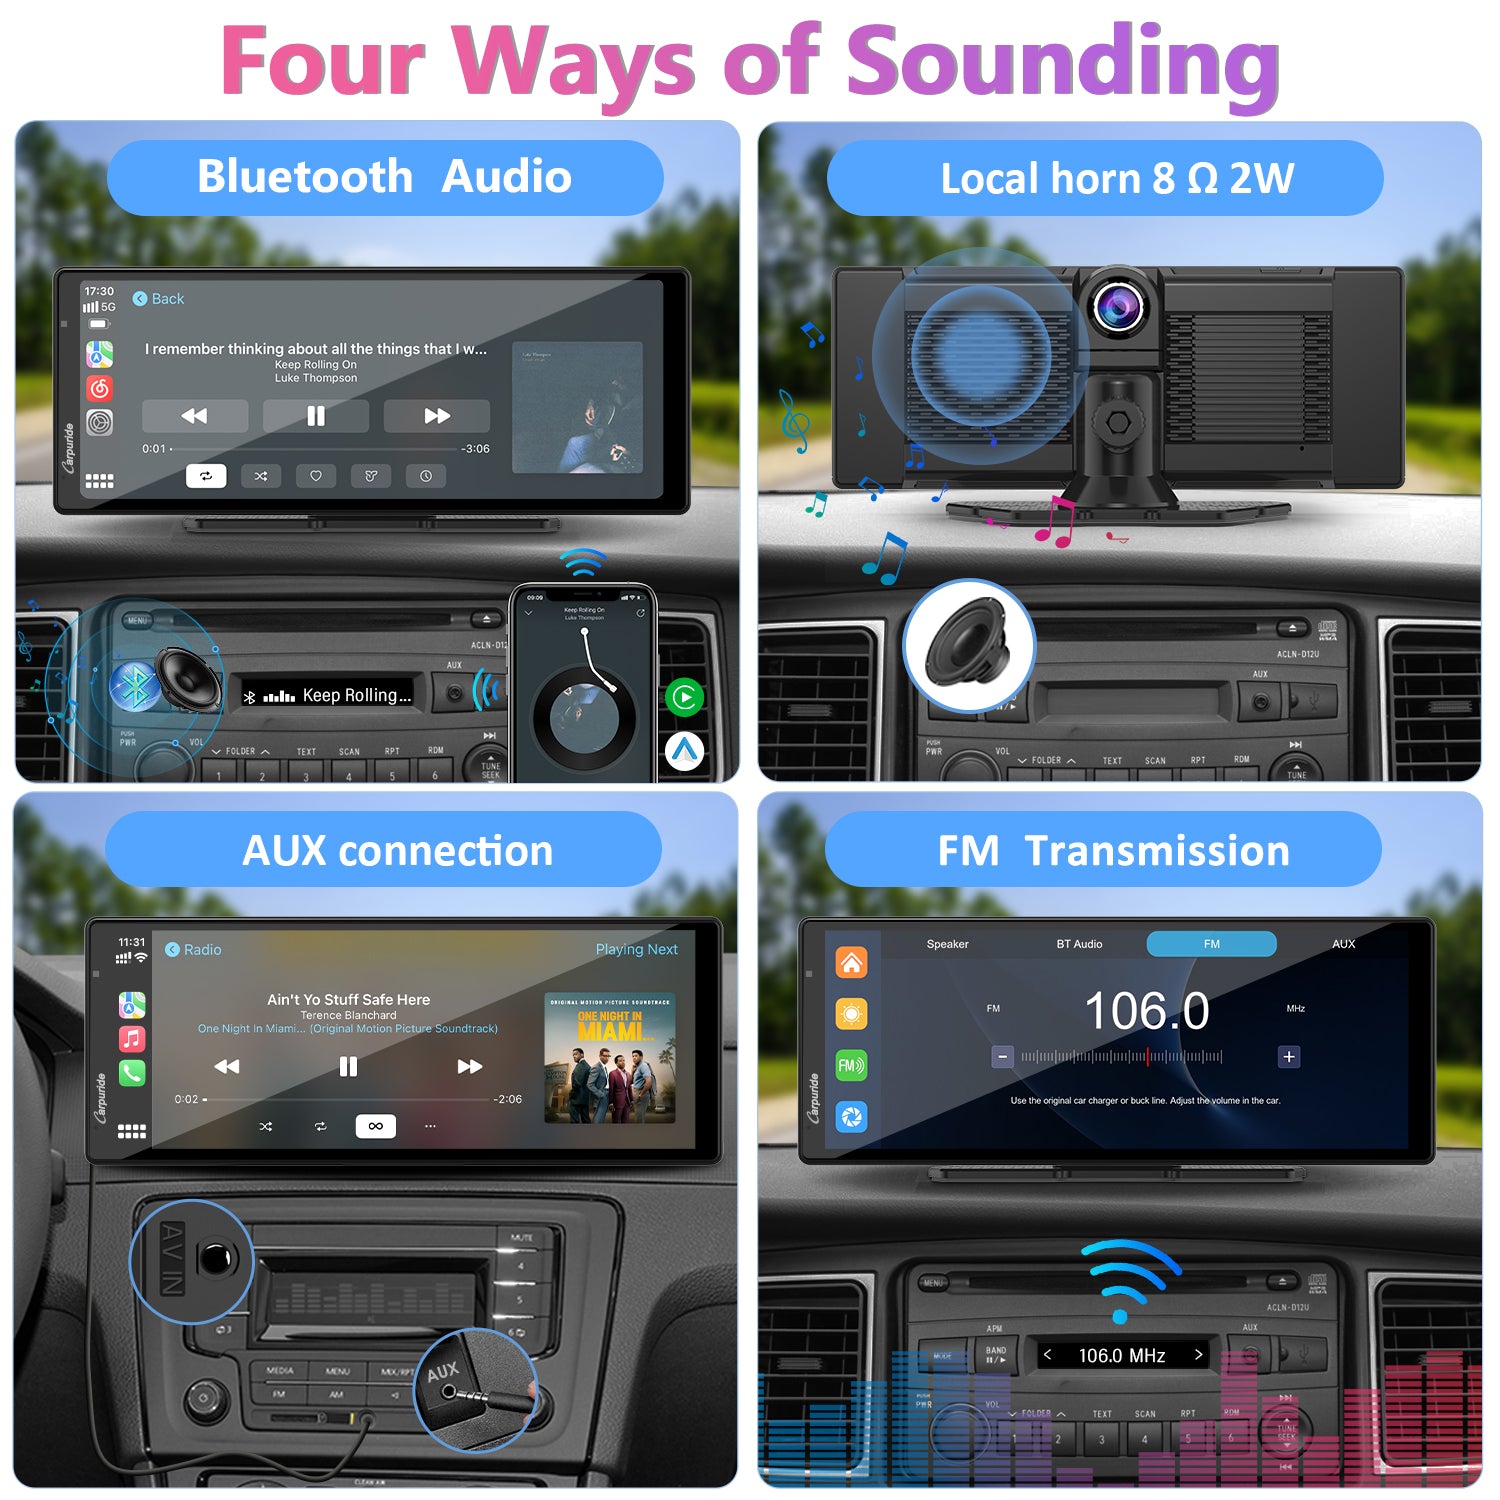 [2024 Newest] Carpuride W903 Portable Apple Carplay & Android Auto with  Dash Cam - 9.3 HD IPS Screen, 4K Front &1080P Rear Cam, Loop Recording